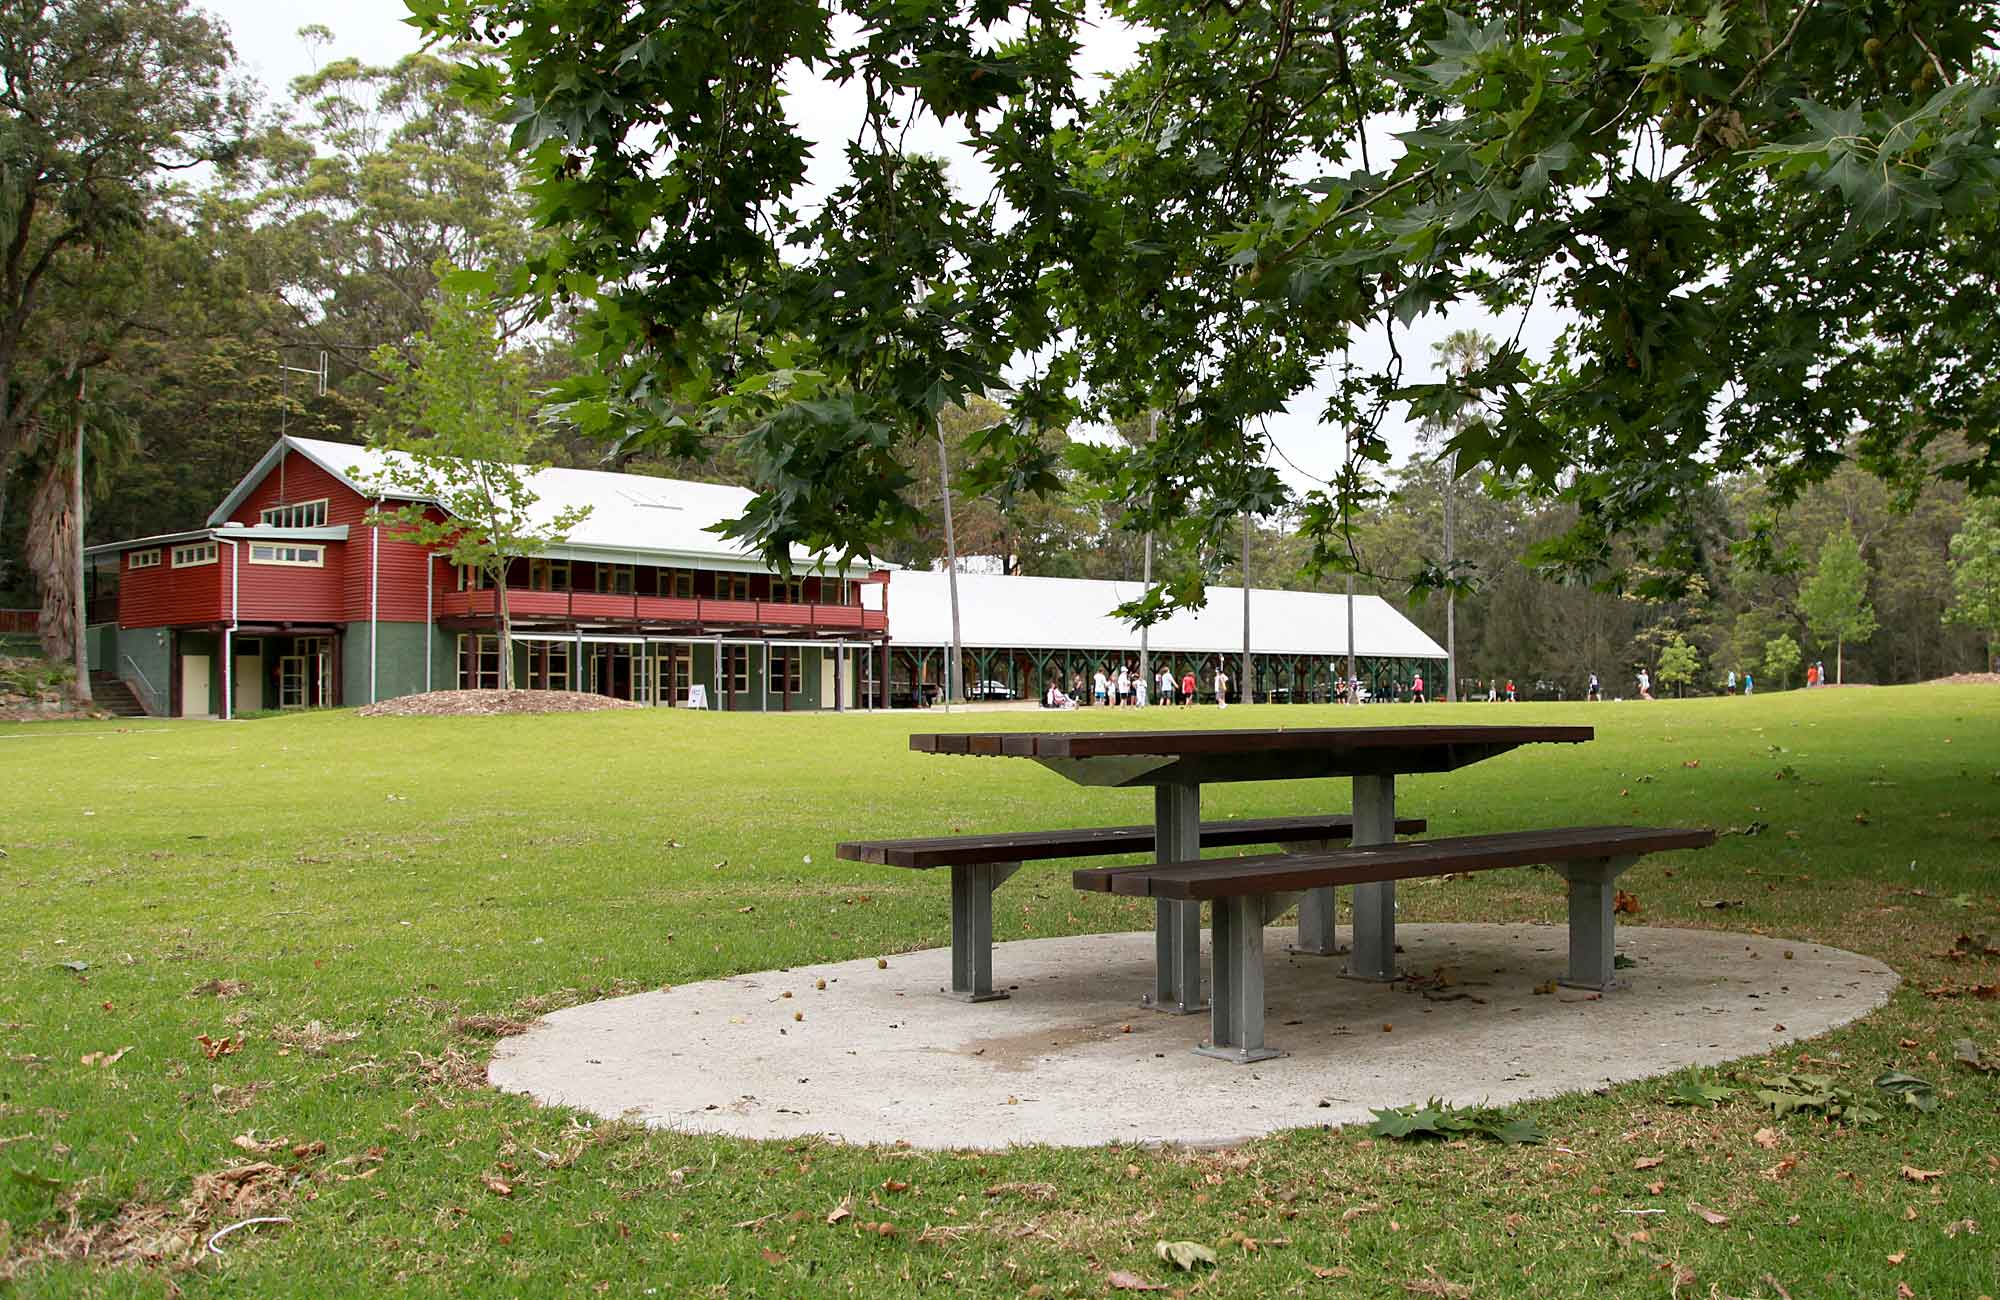 Audley Visitor Centre, Royal National Park. Photo: Andy Richards